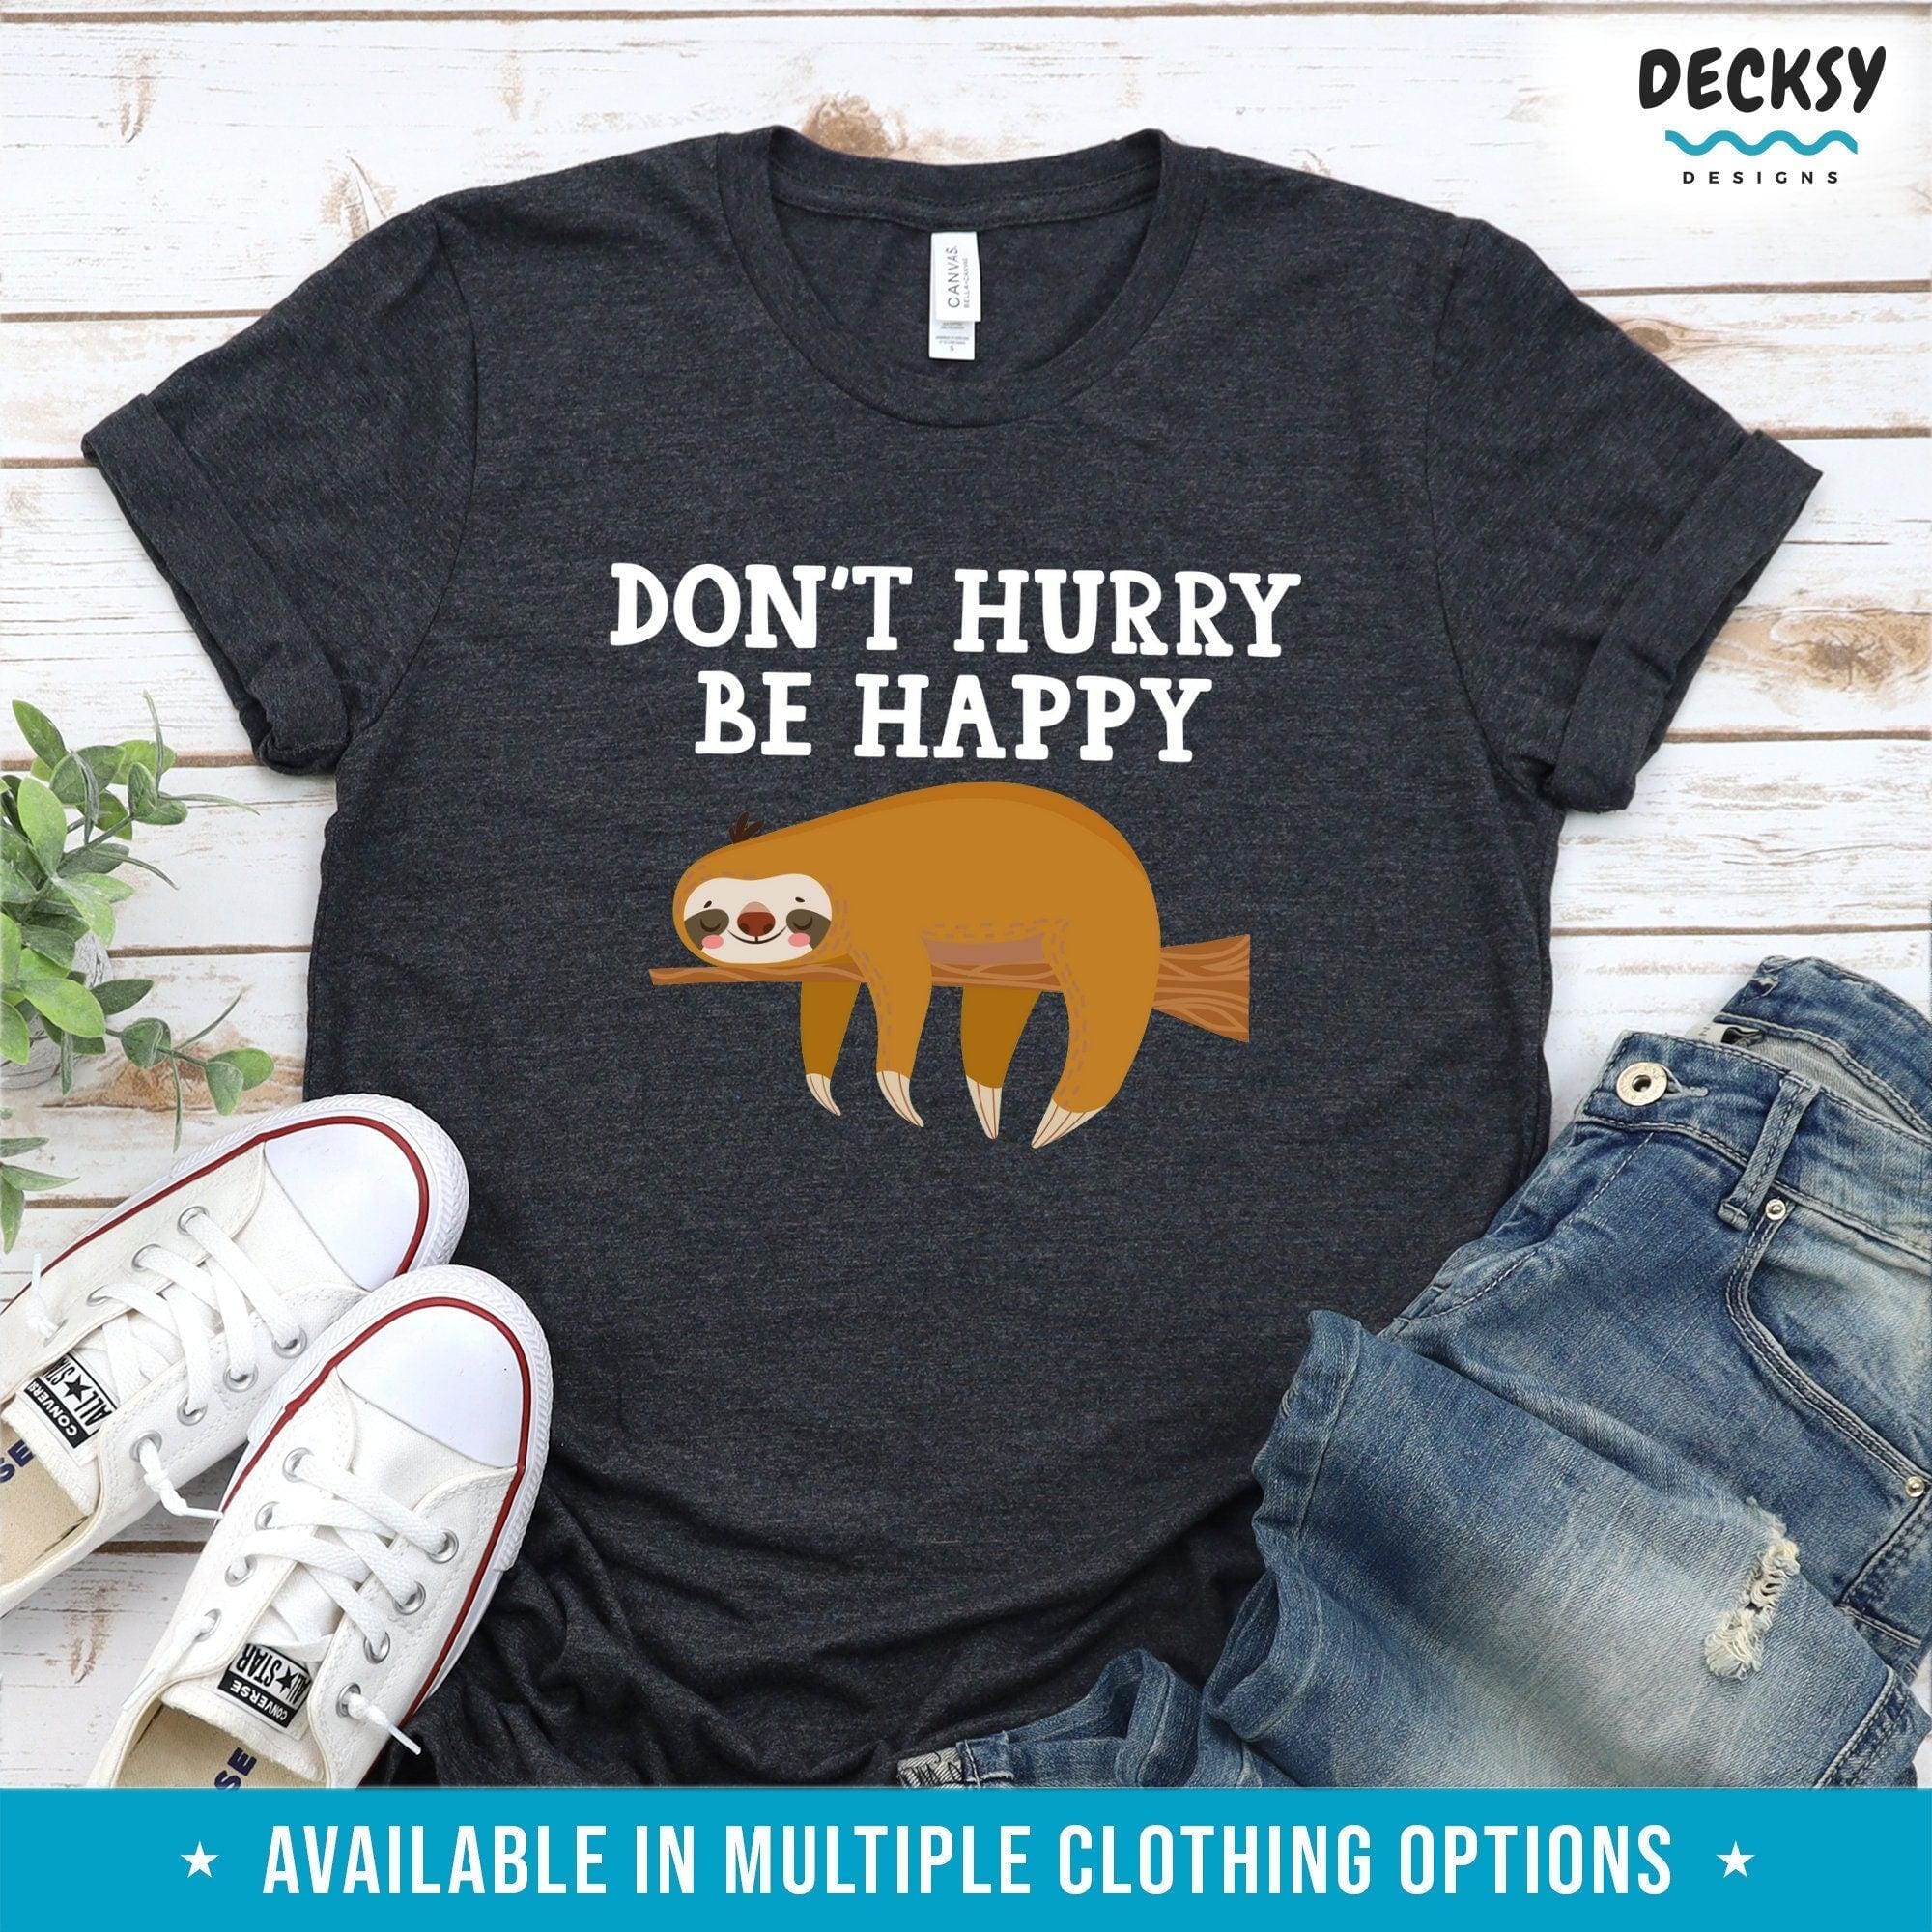 Sloth Mode Shirt, Cute Animal Lover Gift-Clothing:Gender-Neutral Adult Clothing:Tops & Tees:T-shirts:Graphic Tees-DecksyDesigns